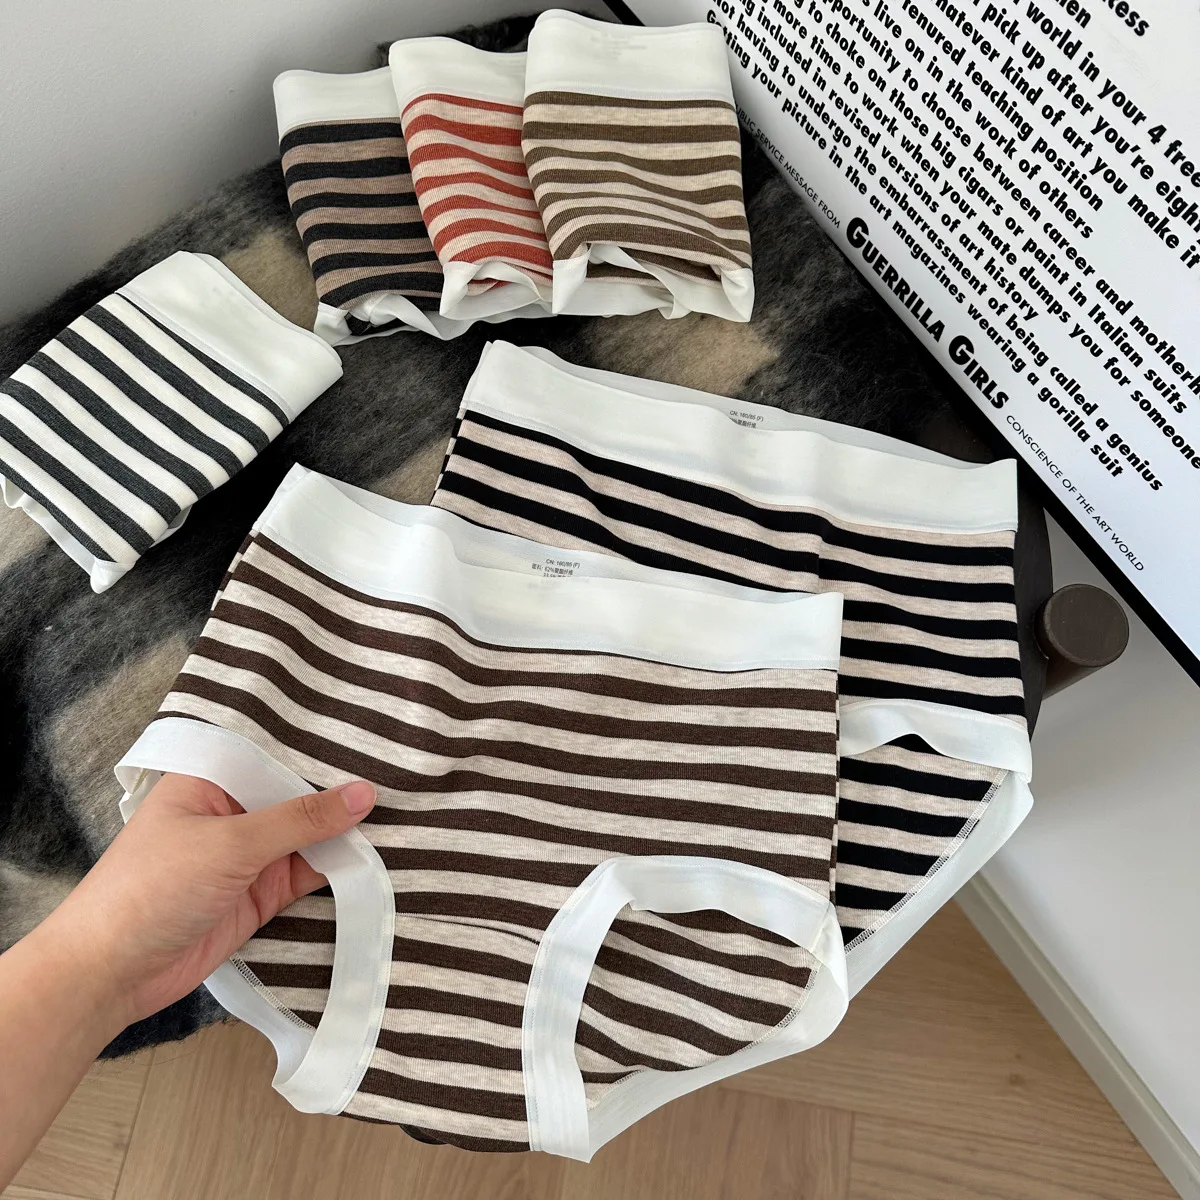 

Sexy Retro Striped Seamless Panties women Mid-rise fashion pure cotton crotch briefs soft lingerie young girl underpants N8491